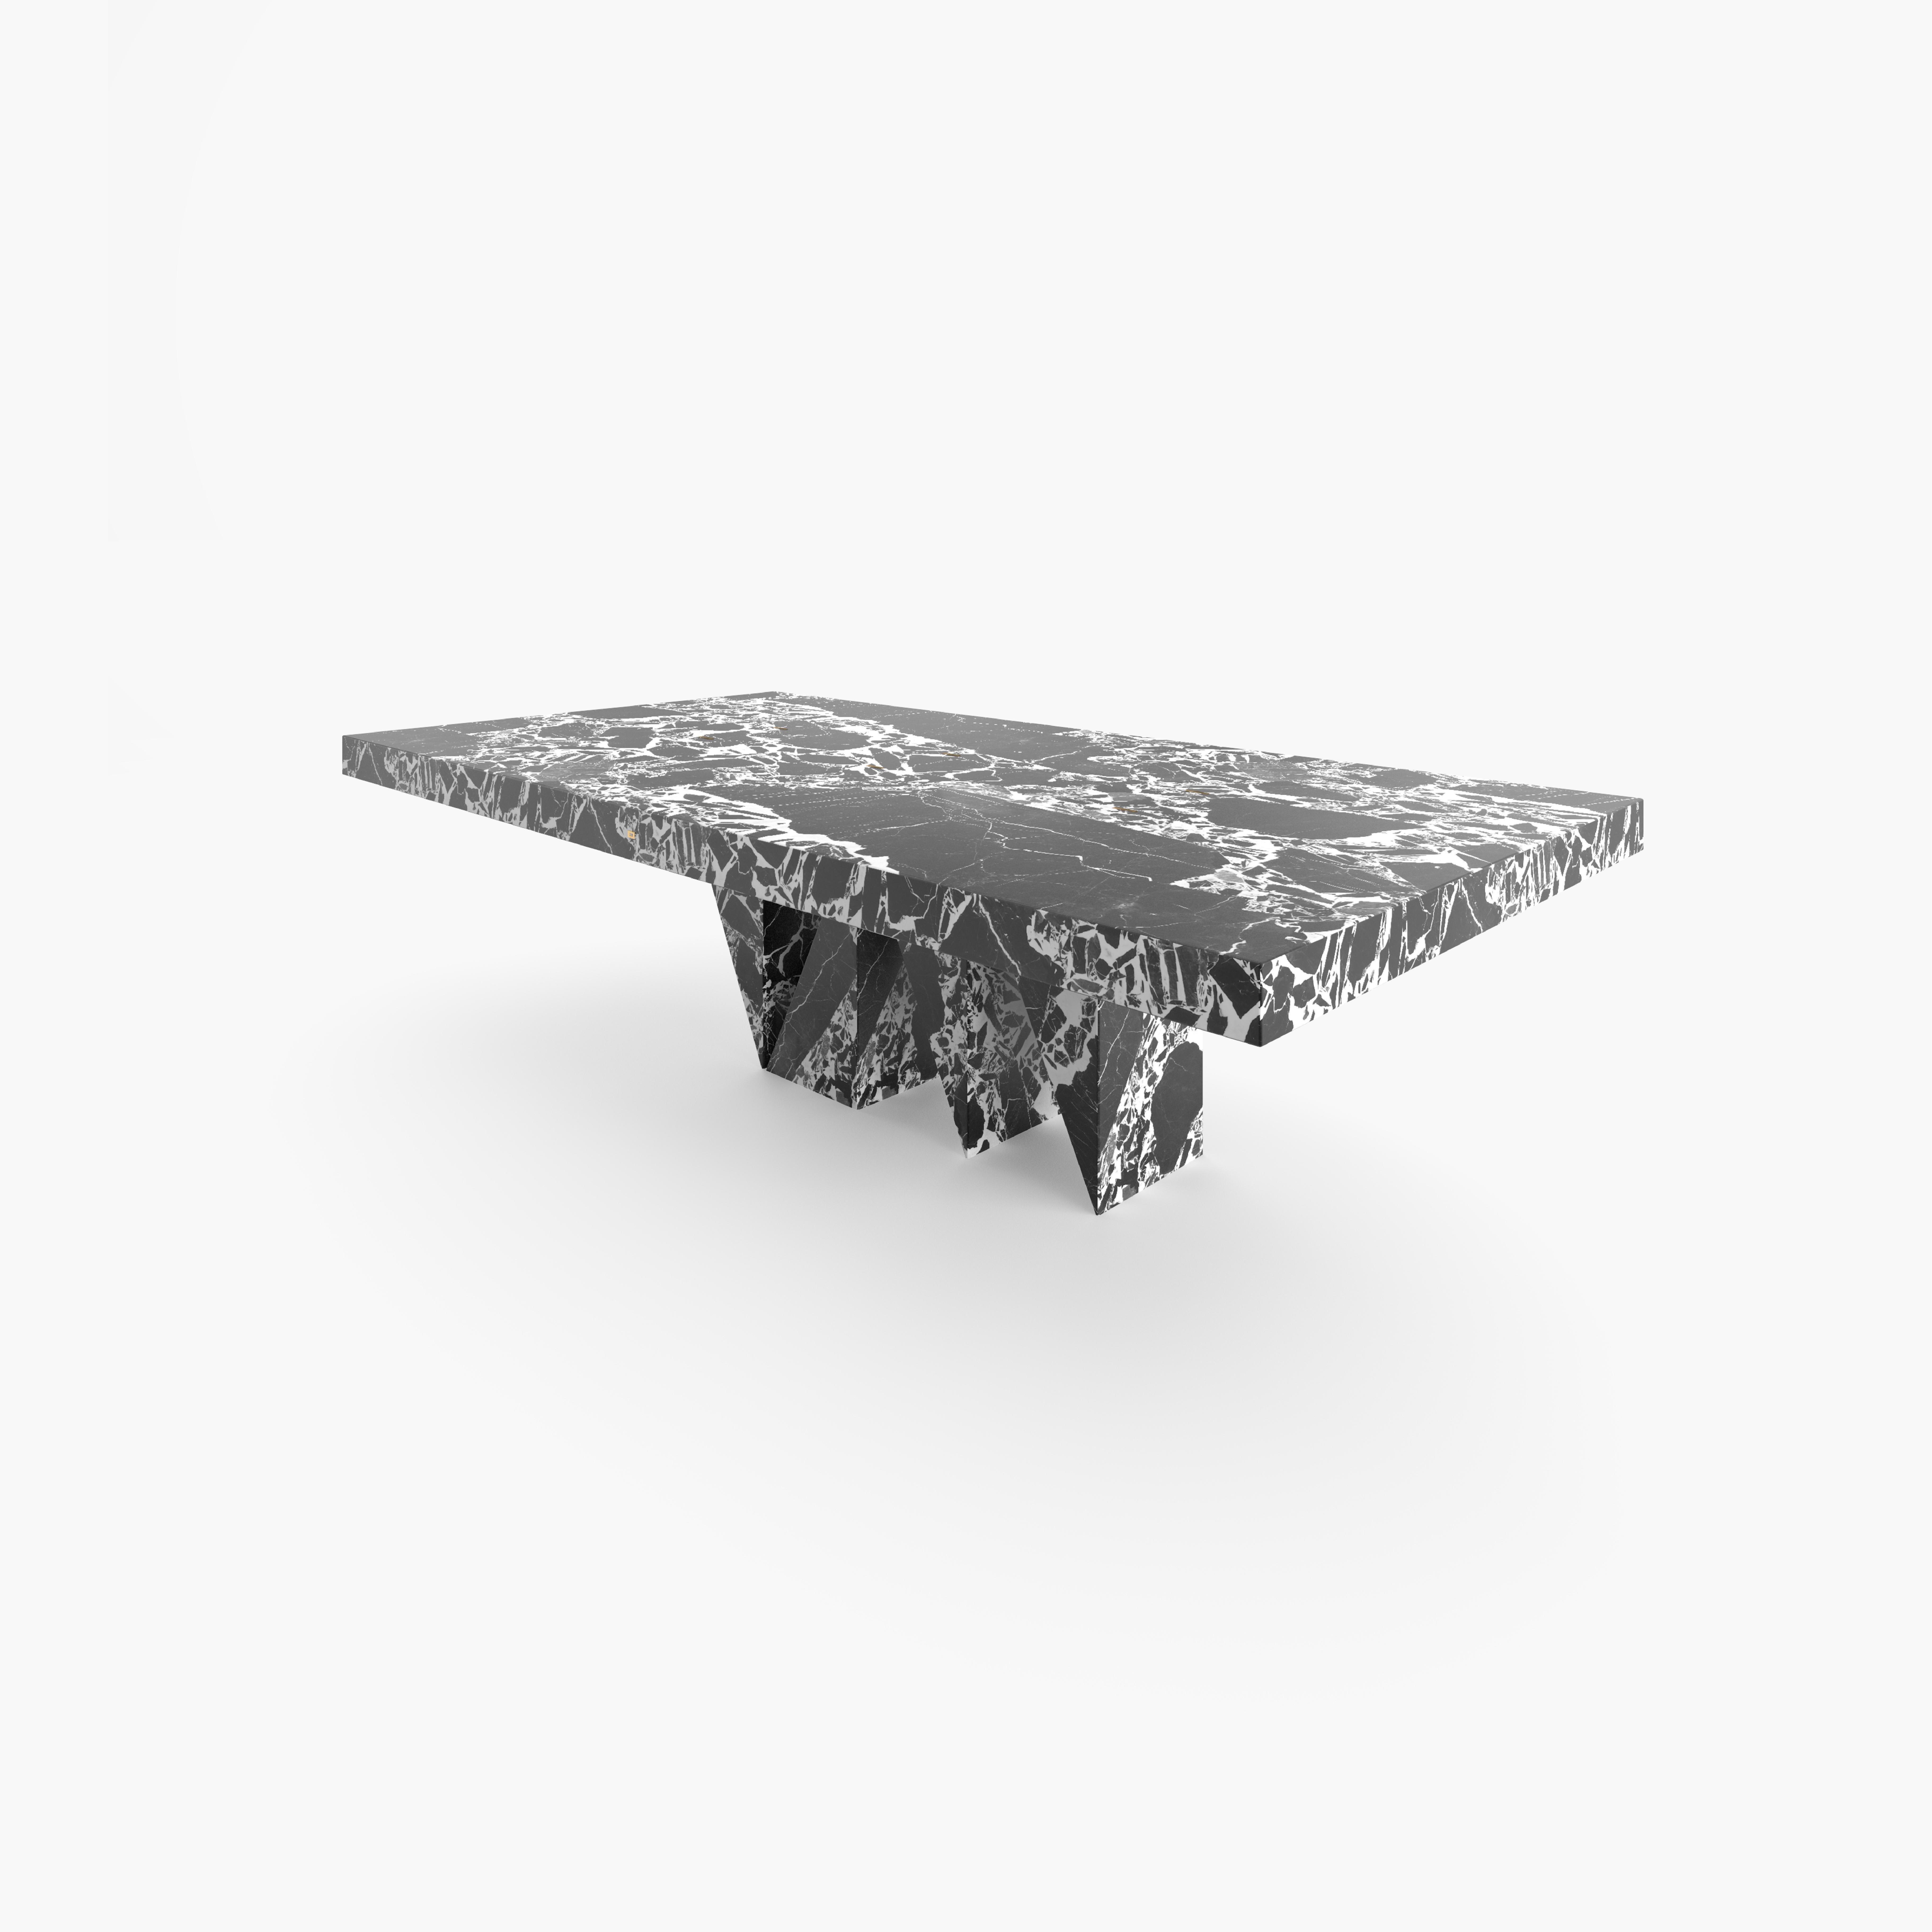 Contemporary Dining-Table Black Marble 260x142x71cm Triangular Middle-Leg, Handcrafted, pc1/1 For Sale